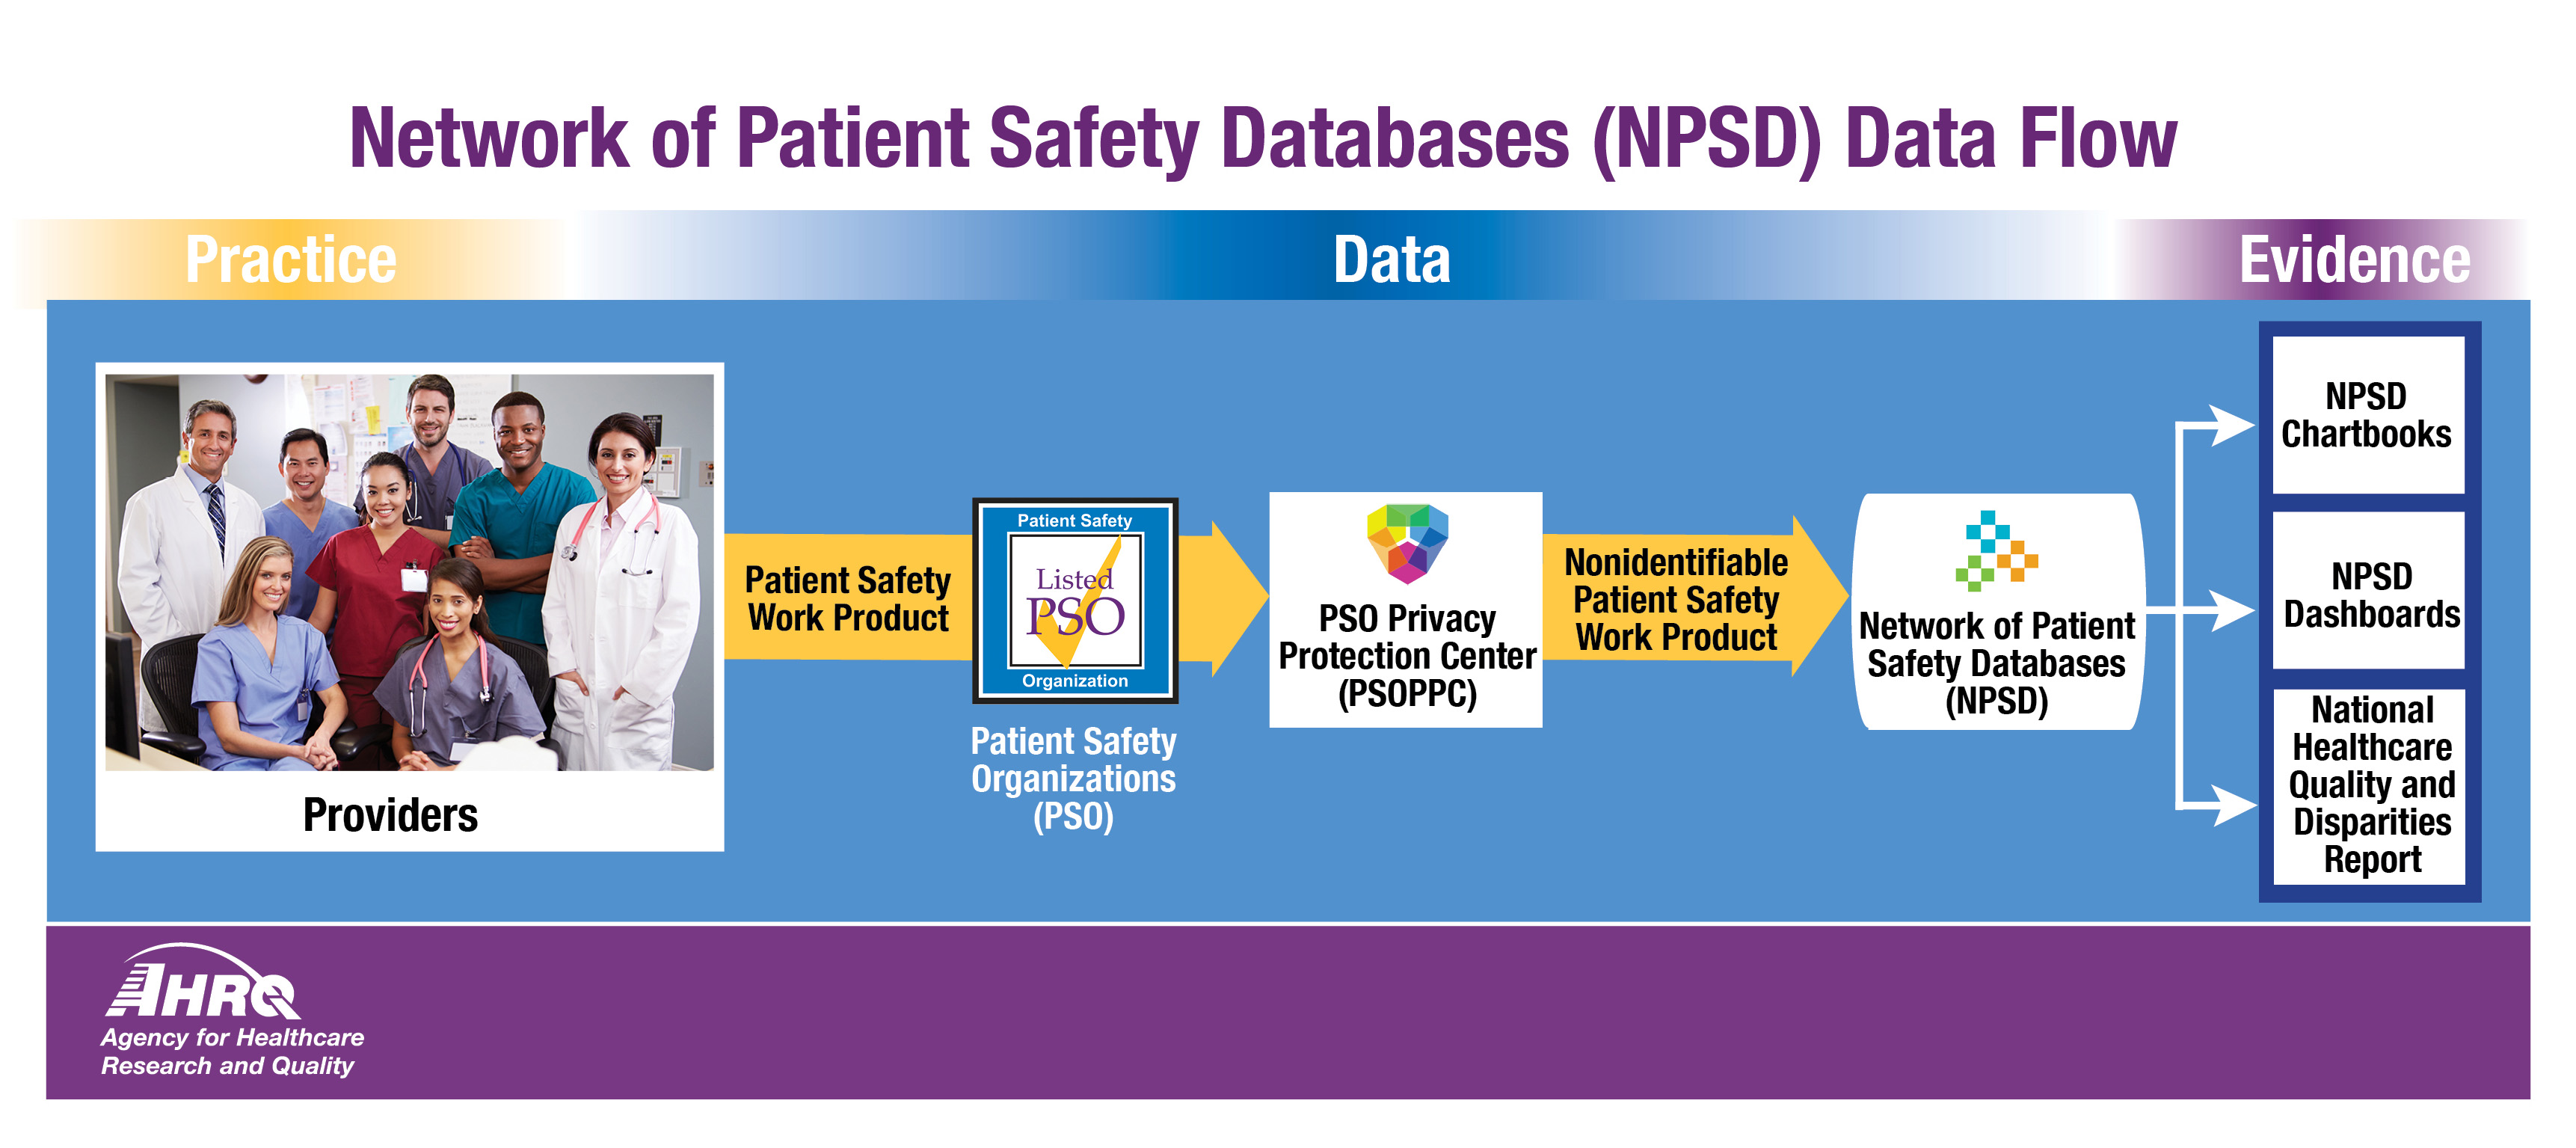 This horizontal graphic shows the Network of Patient Safety Databases (NPSD) Data Flow. Practices and providers provide Patient Safety Work Product (PSWP) to Patient Safety Organizations (PSOs). The PSOs send the  Patient Safety Work Product to the PSO Privacy Protection Center (PSOPPC), which sends the now nonidentifiable Patient Safety Work Product  to the Network of Patient Safety Databases (NPSD), where the data is compiled into an NPSD Chartbook, NPSD Dashboards, and the National Healthcare Quality and Disparity Report.